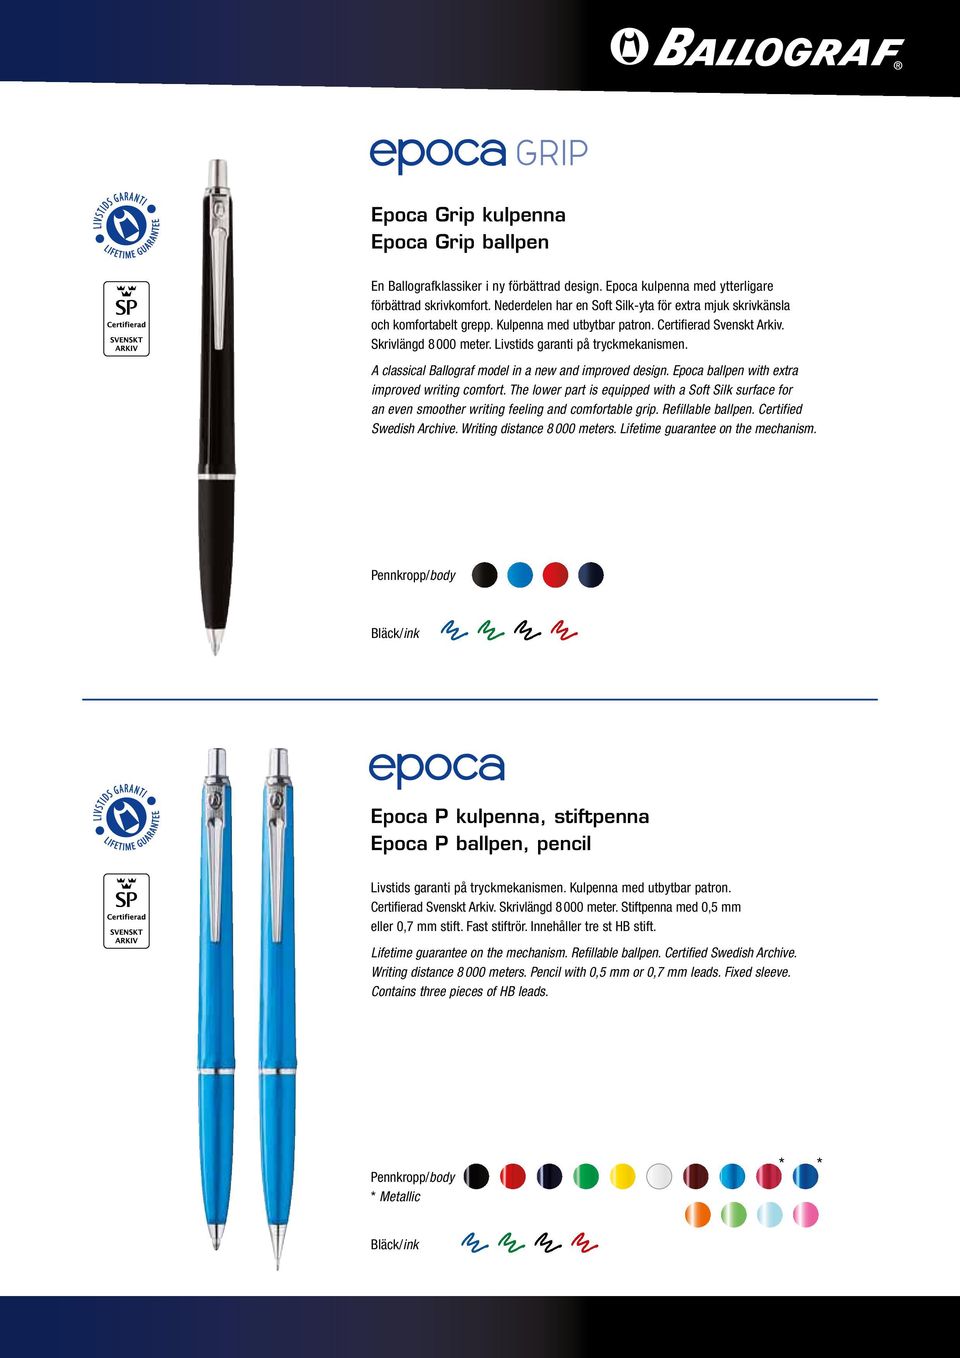 A classical Ballograf model in a new and improved design. Epoca ballpen with extra improved writing comfort.